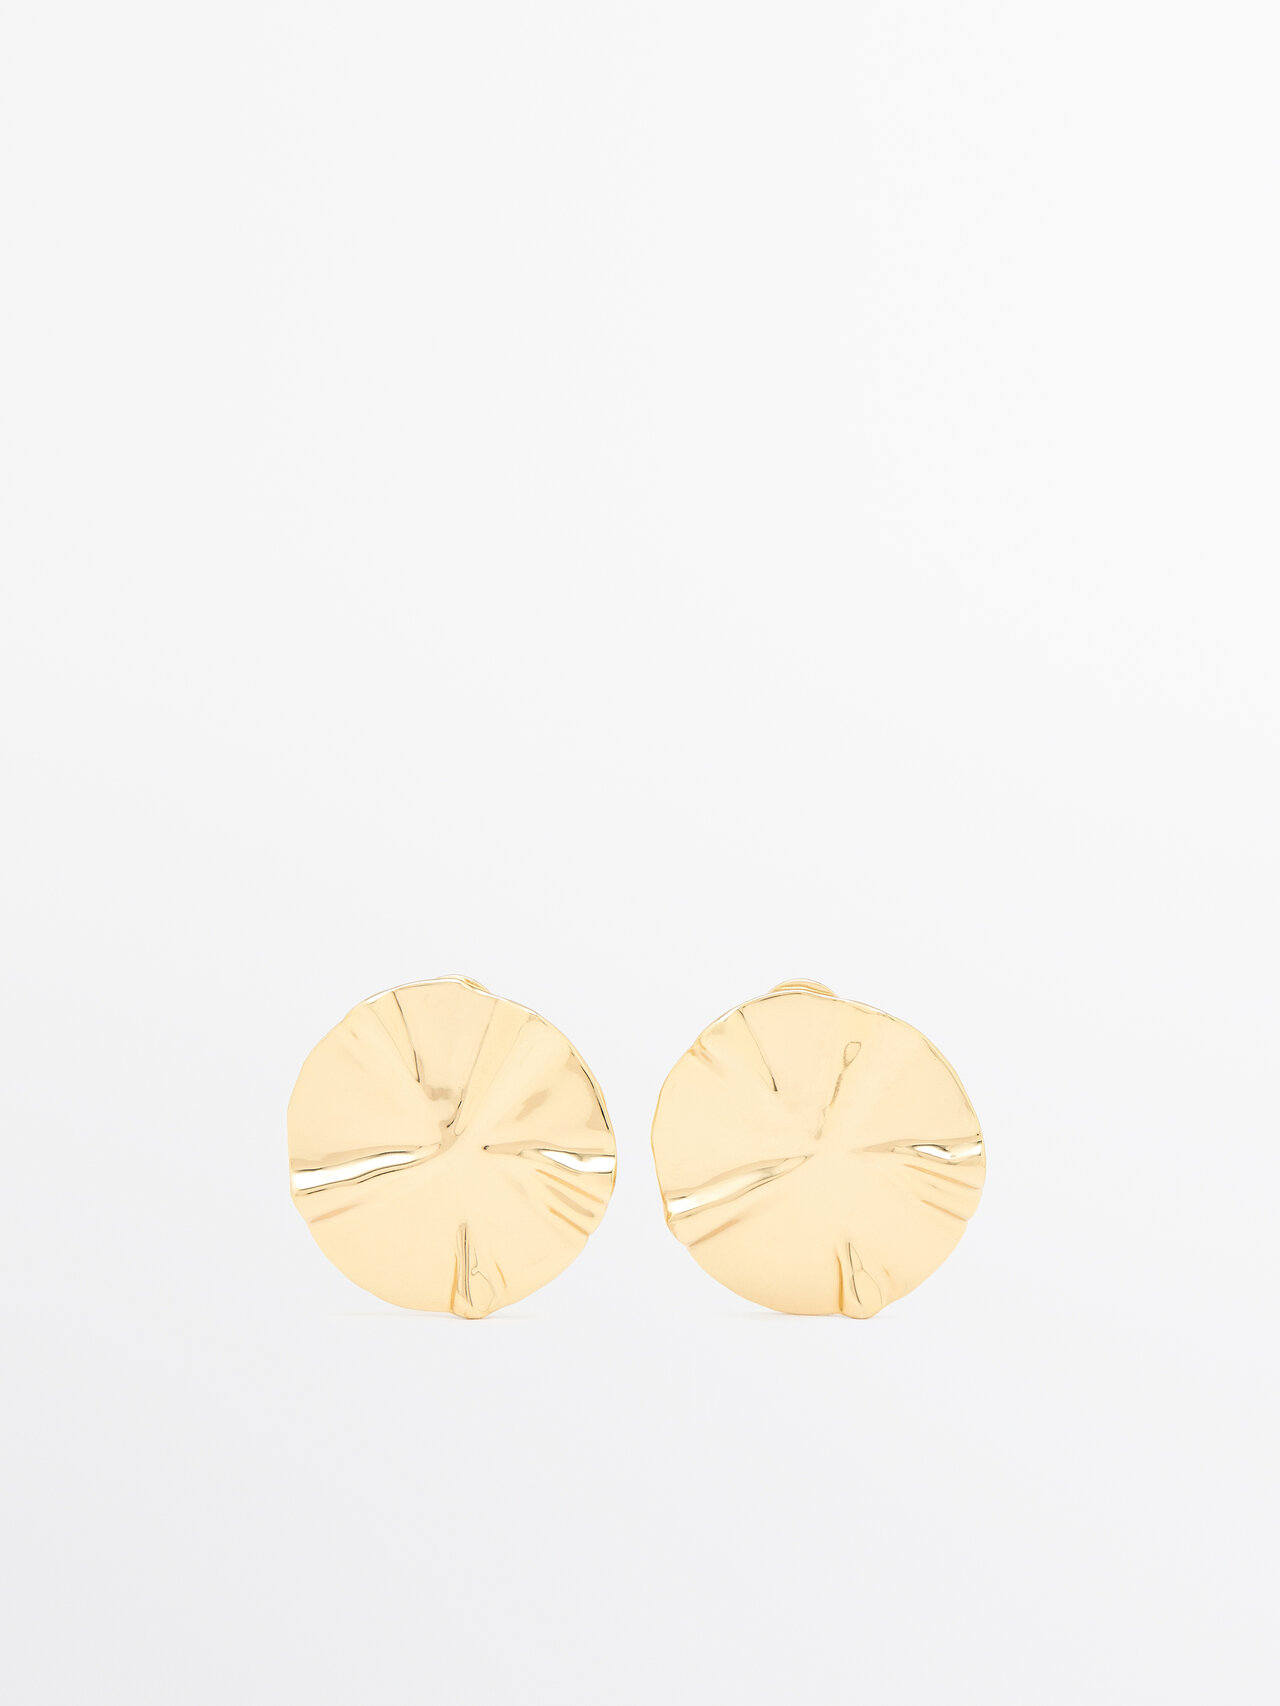 Massimo Dutti Earrings With Textured Piece Detail In Golden